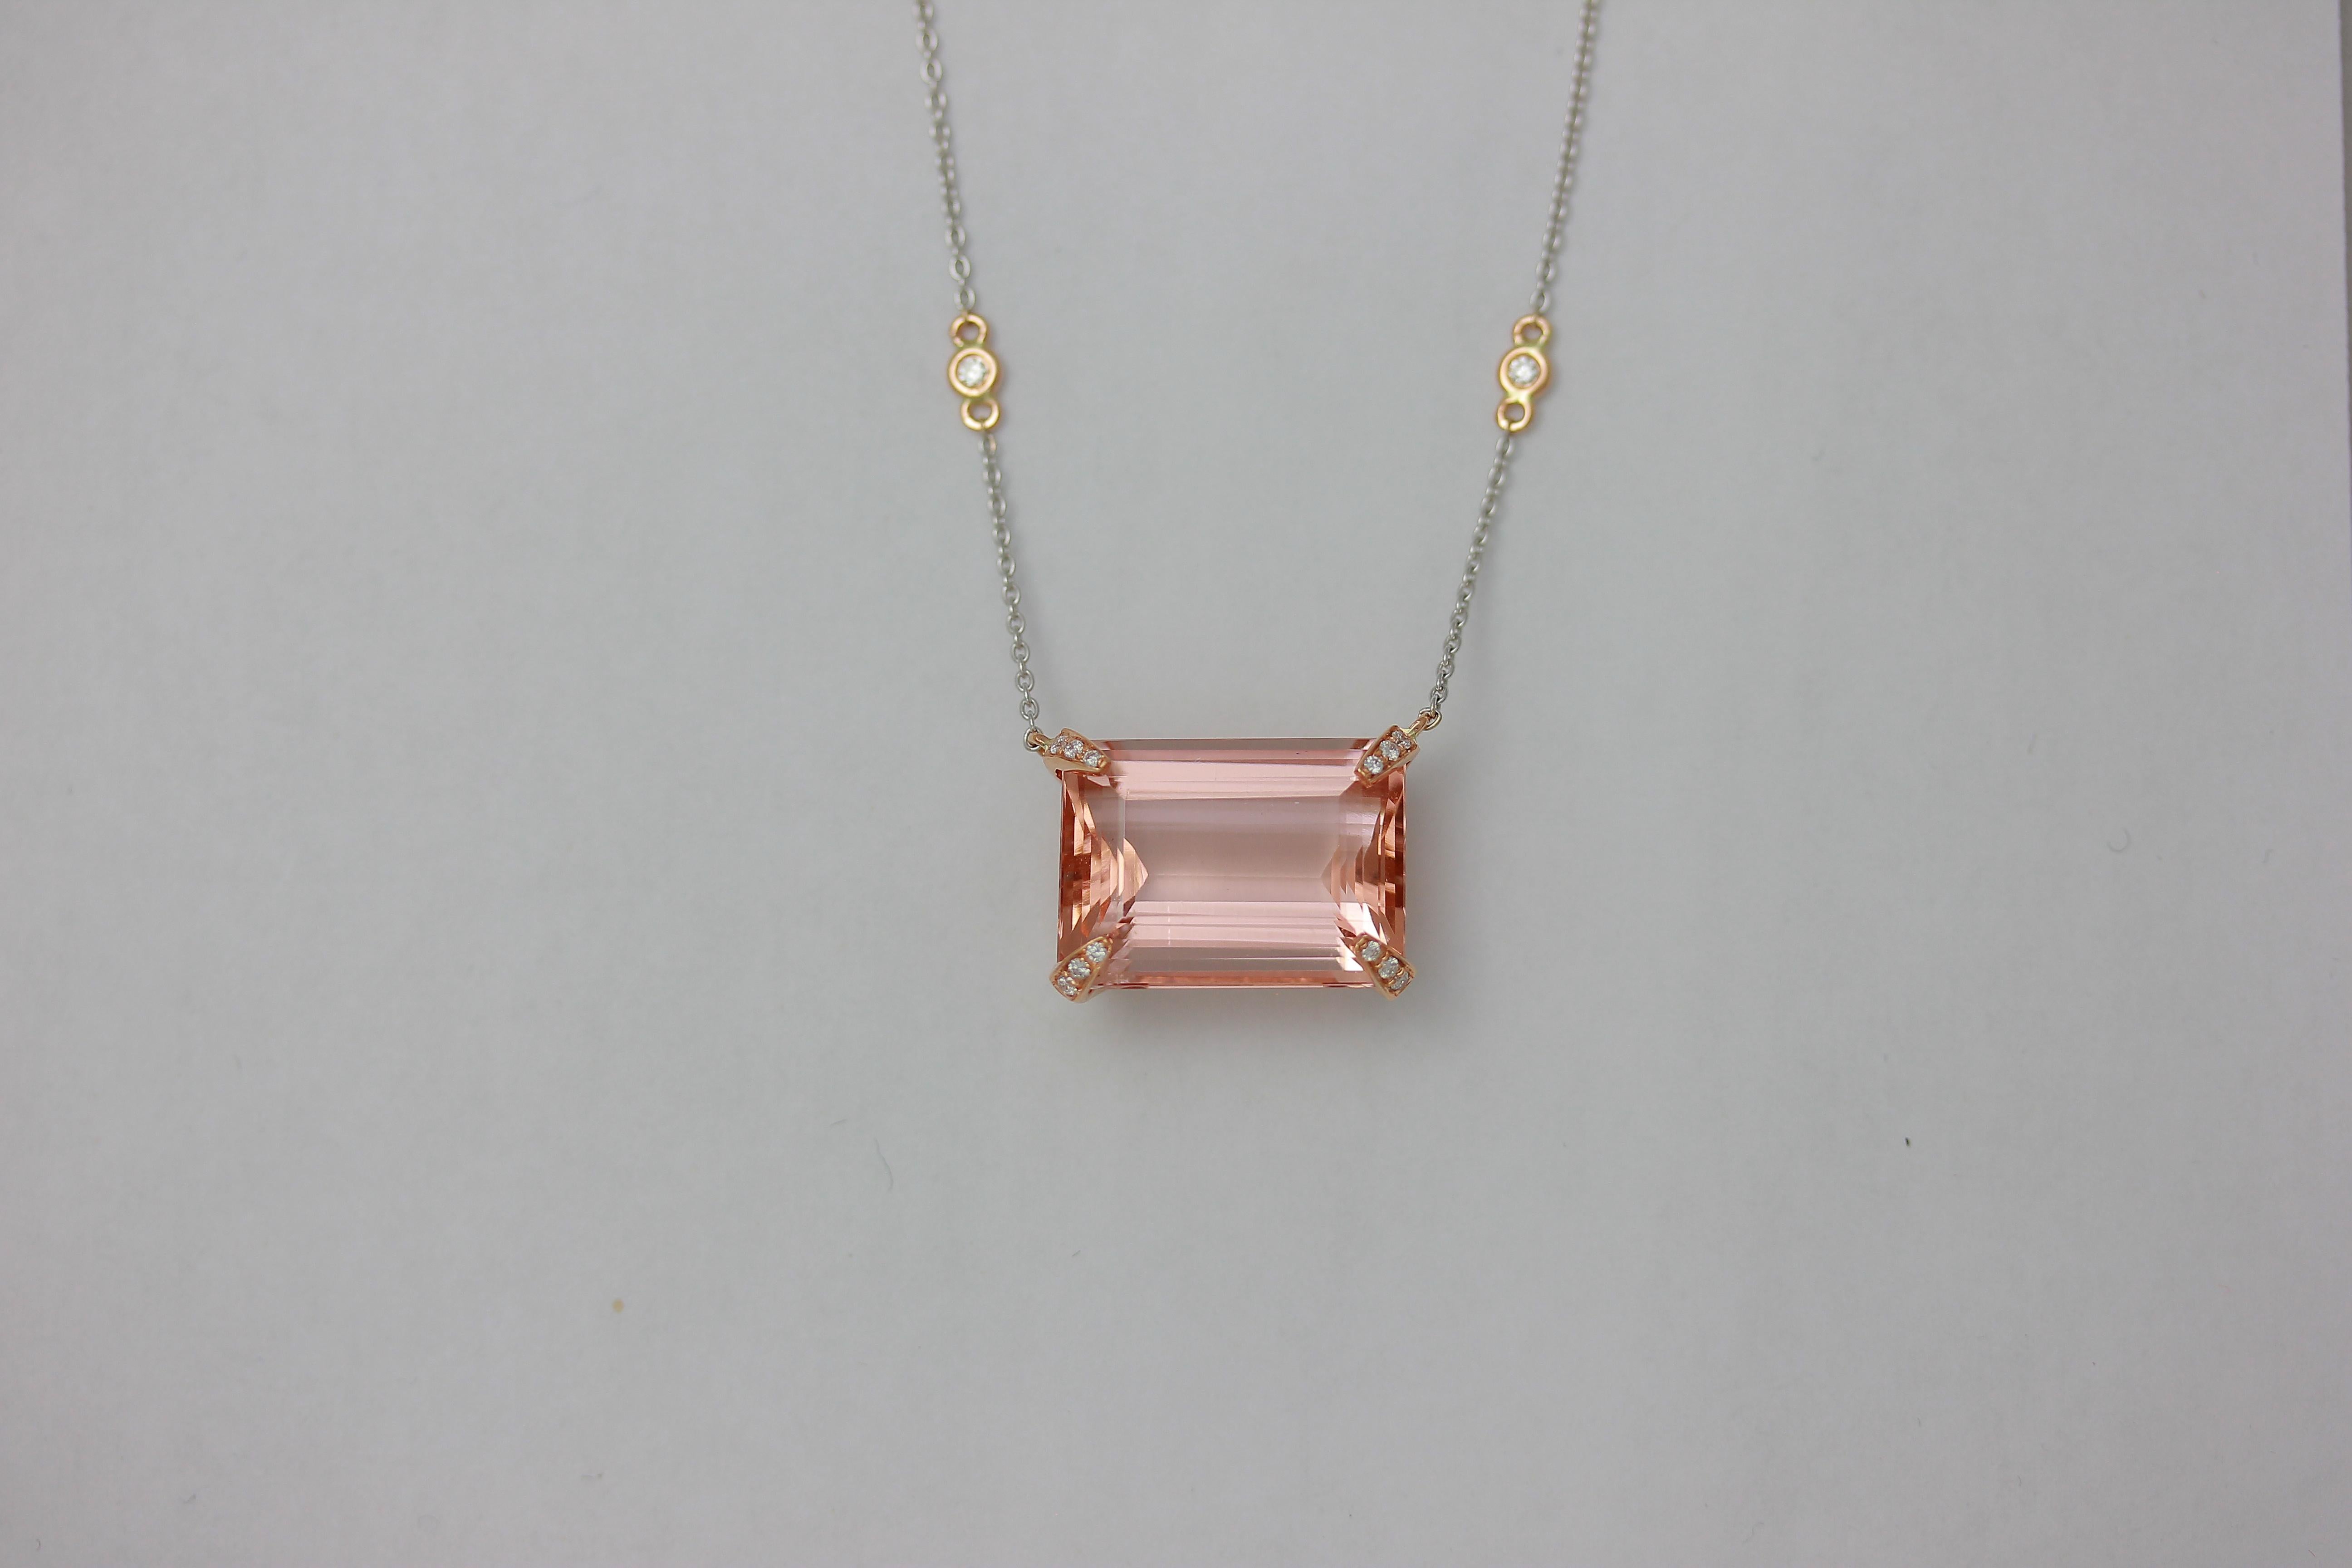 Emerald Cut Frederic Sage 16.81 Carat Morganite and Diamond One of Kind Pendant with Chain For Sale